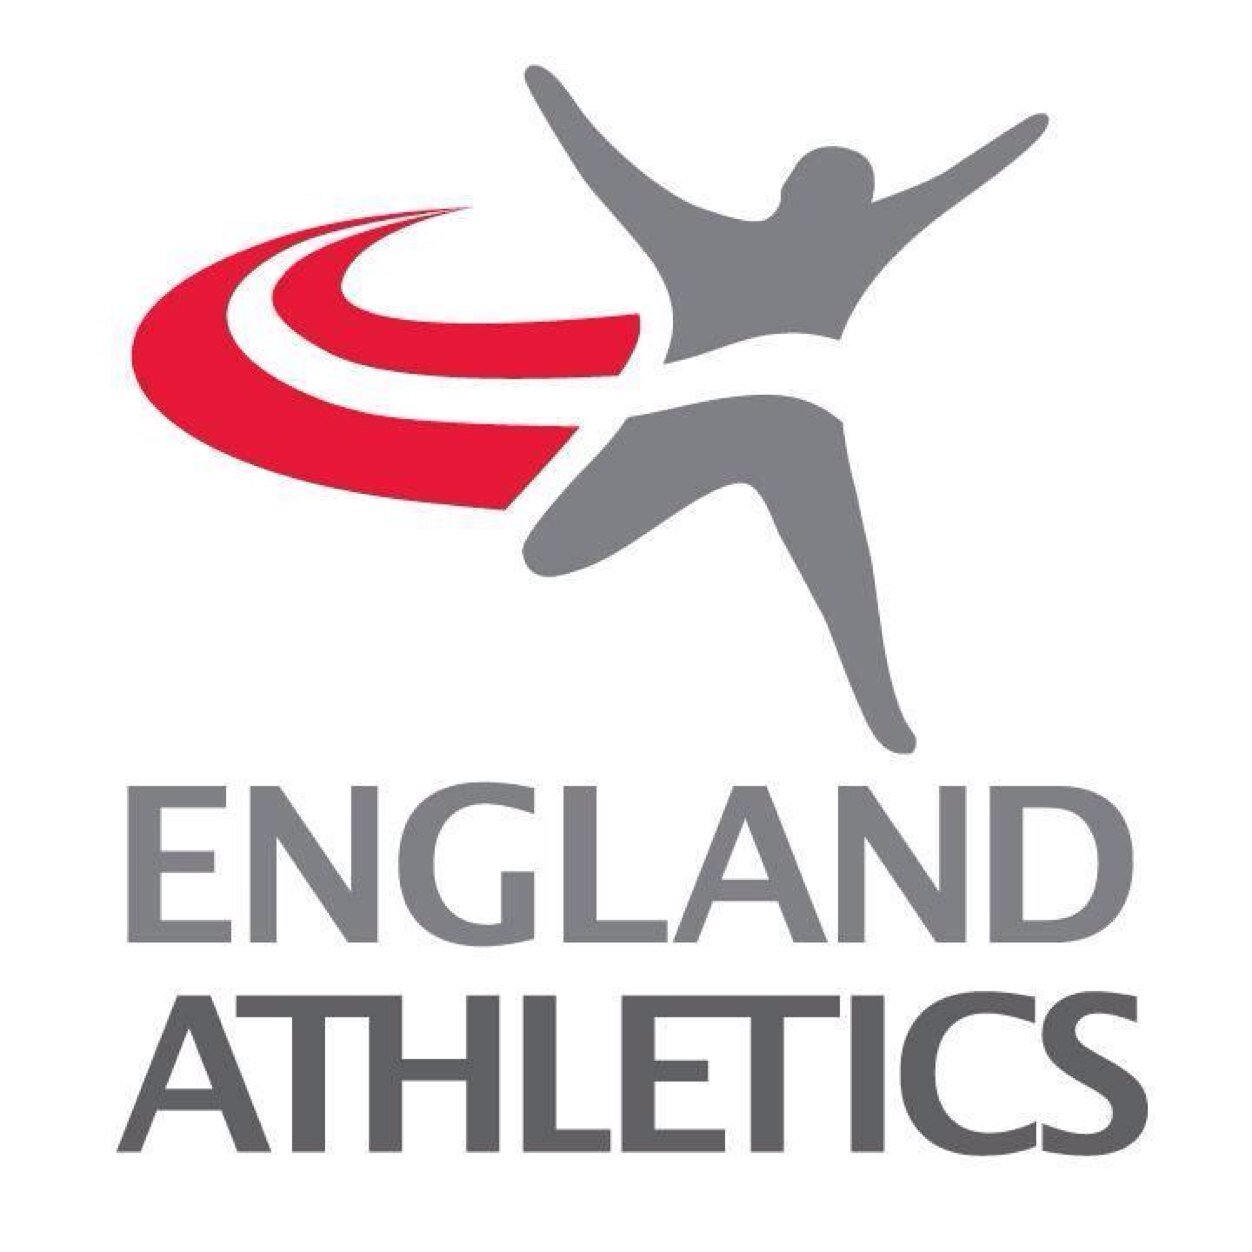 Official account of England Athletics in the North West. Follow for updates, opportunities plus news and reports on the work being delivered by local CCSO's.